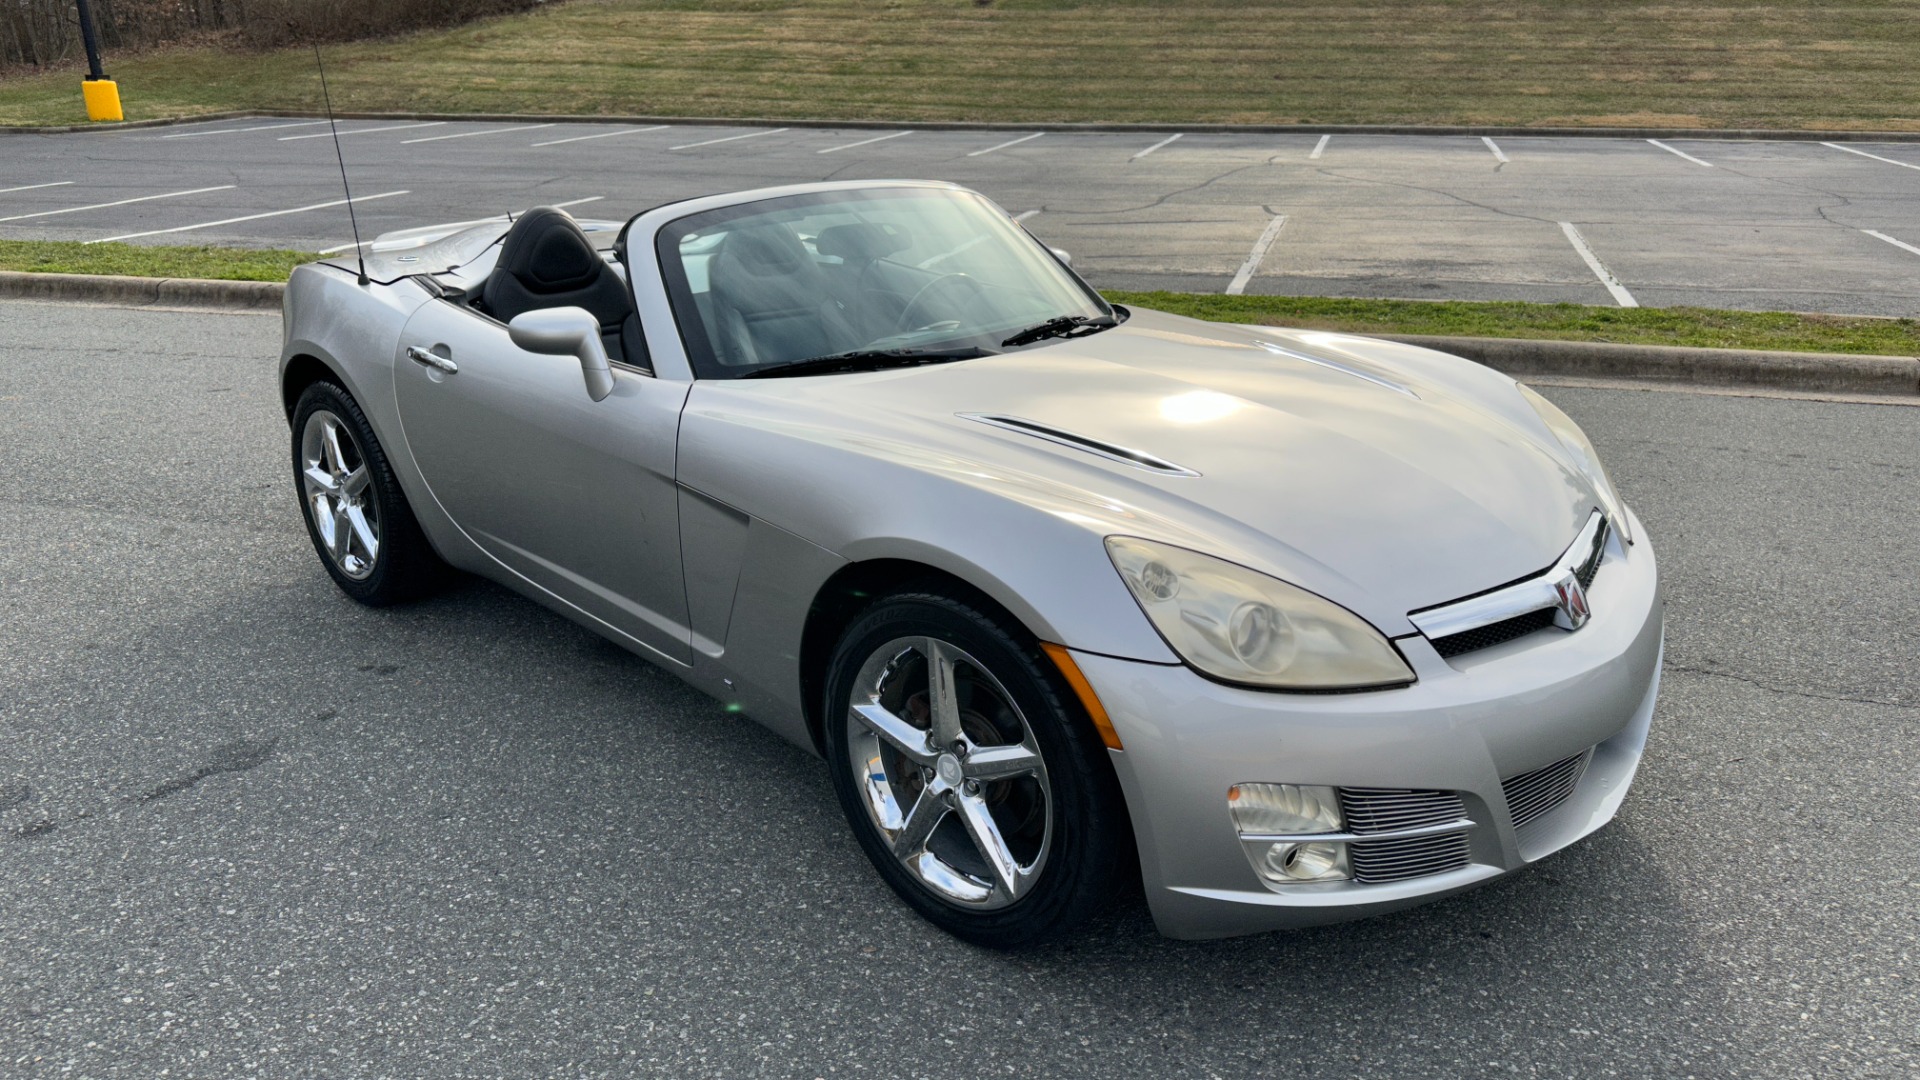 Used 2008 Saturn Sky CONVERTIBLE / MONSOON AUDIO / AUTOMATIC / PREMIUM TRIM / SPOILER for sale Sold at Formula Imports in Charlotte NC 28227 4